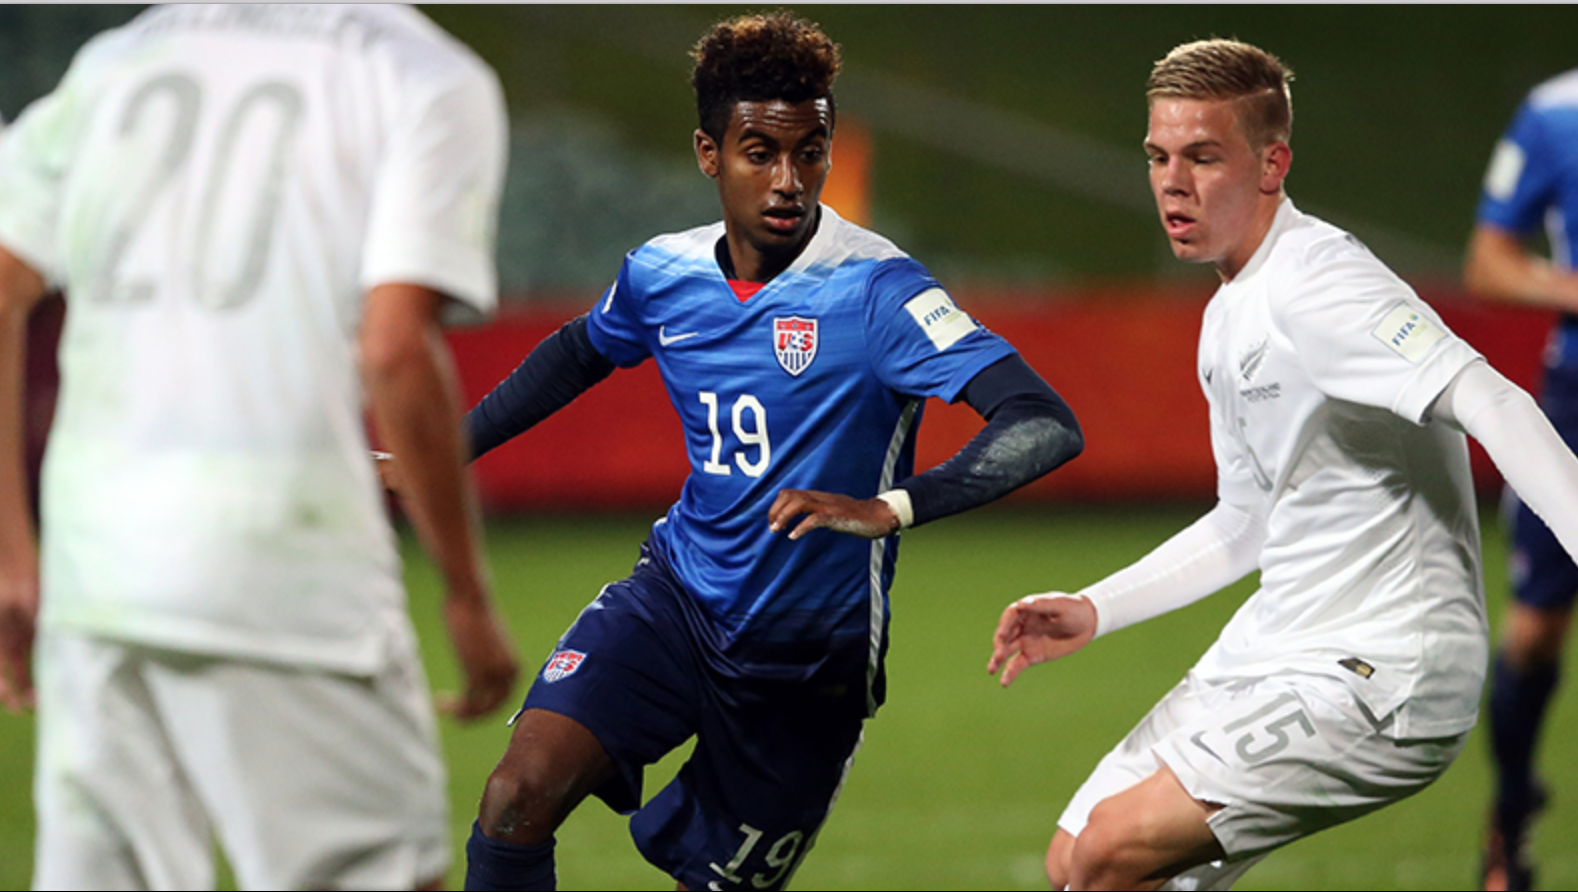 Gedion Zelalem: Wowing at the U-20 World Cup